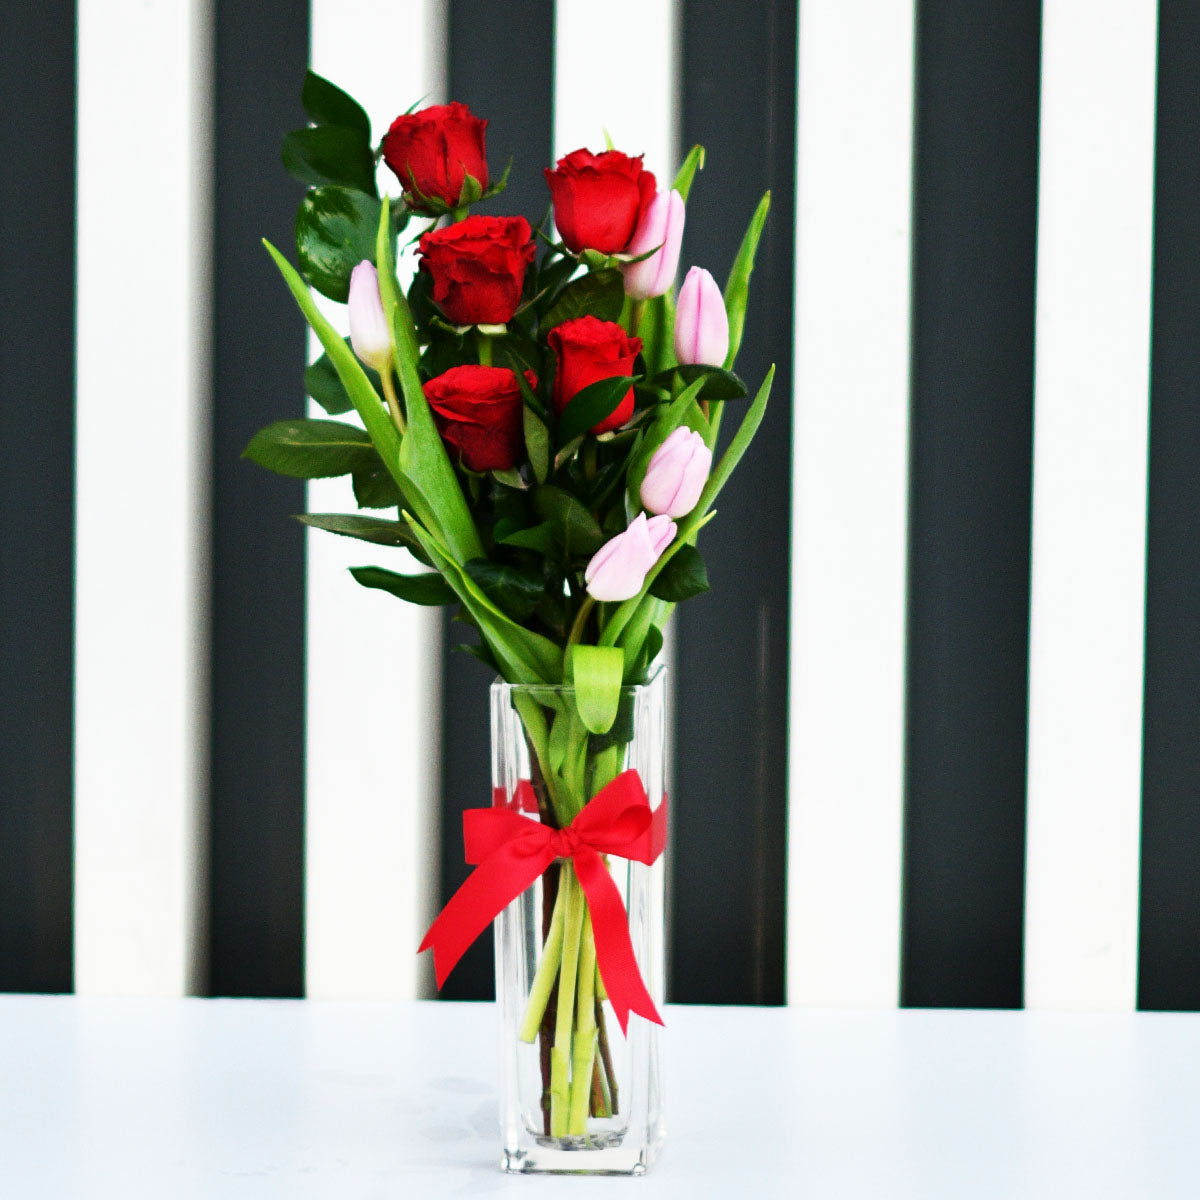 Red Roses & Tulip on a Glass Vase